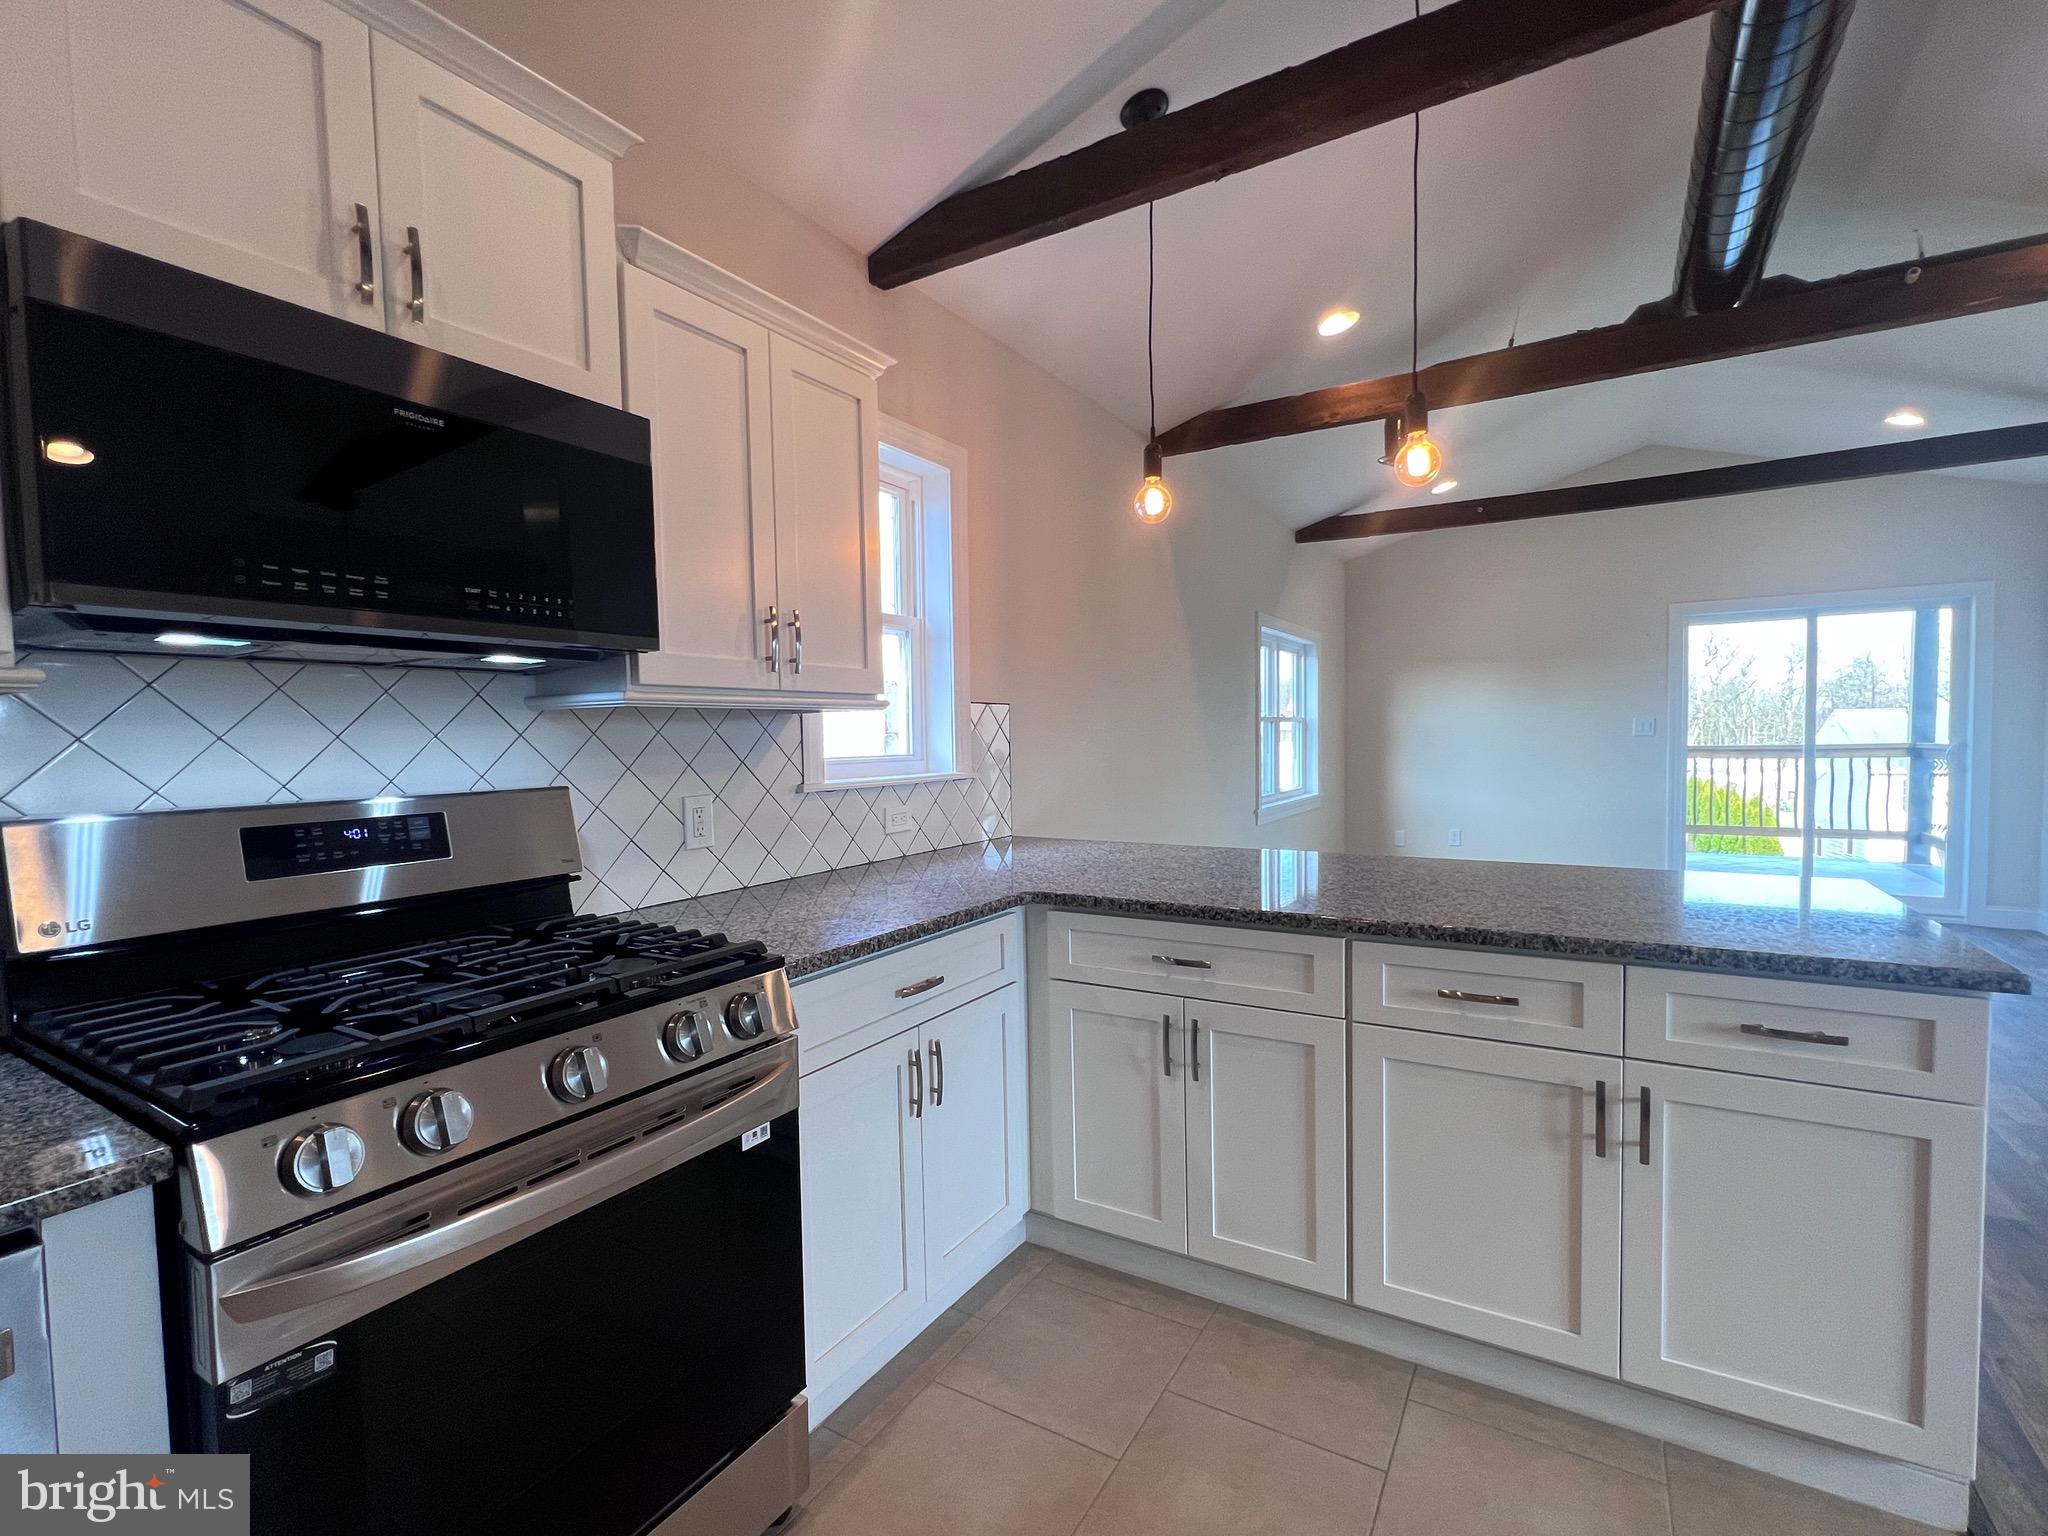 a kitchen with stainless steel appliances white cabinets granite counter tops and a window